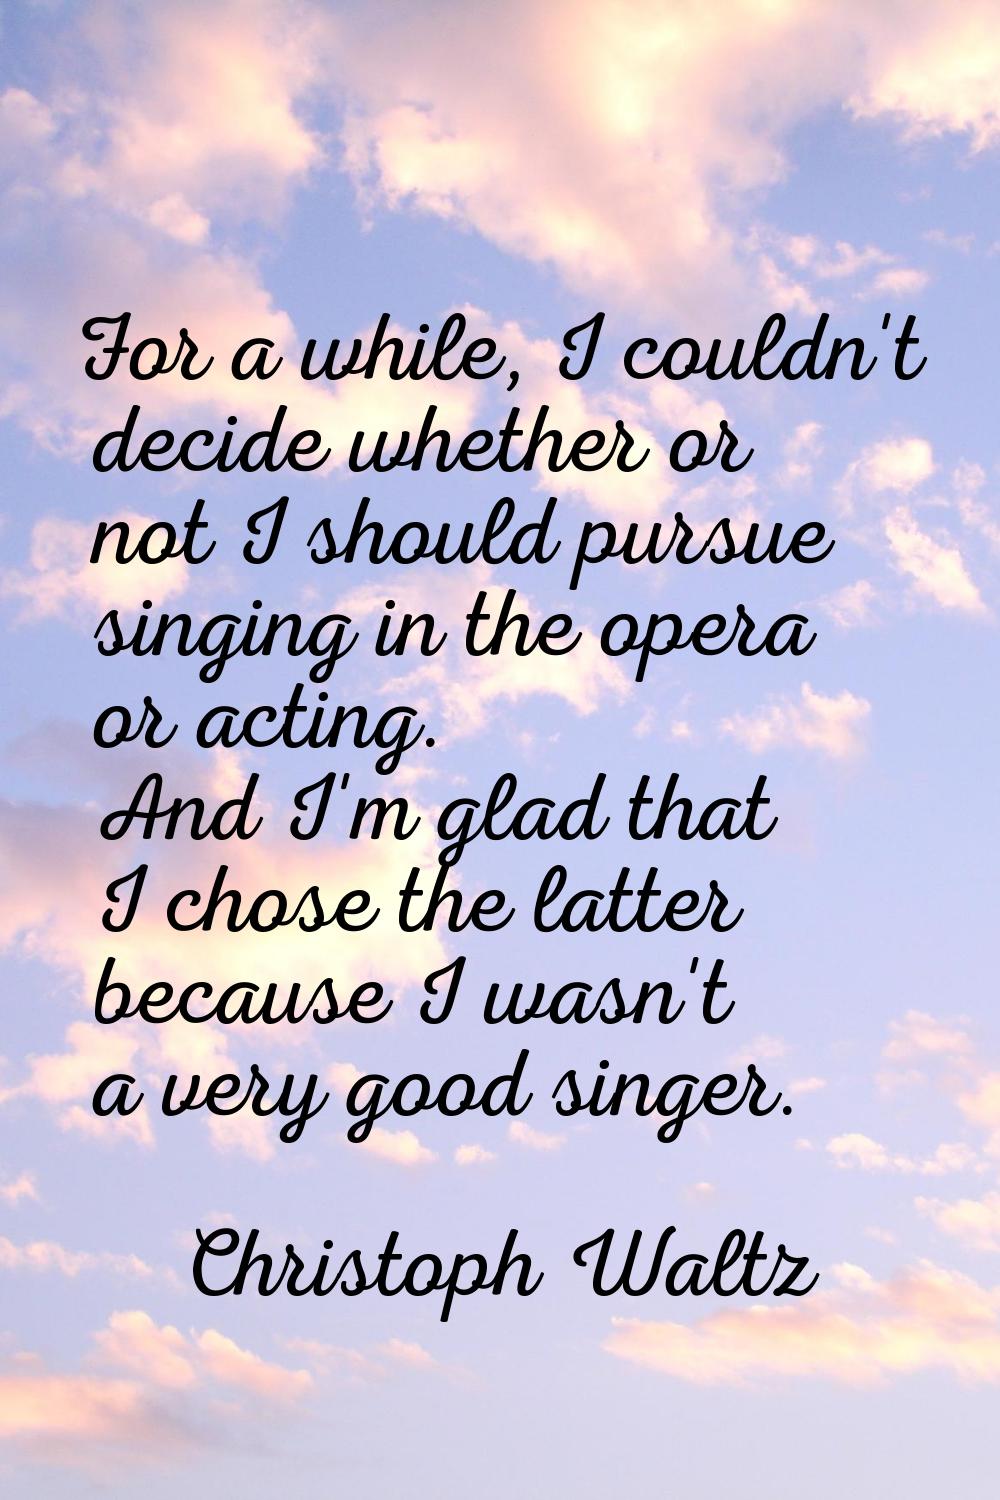 For a while, I couldn't decide whether or not I should pursue singing in the opera or acting. And I